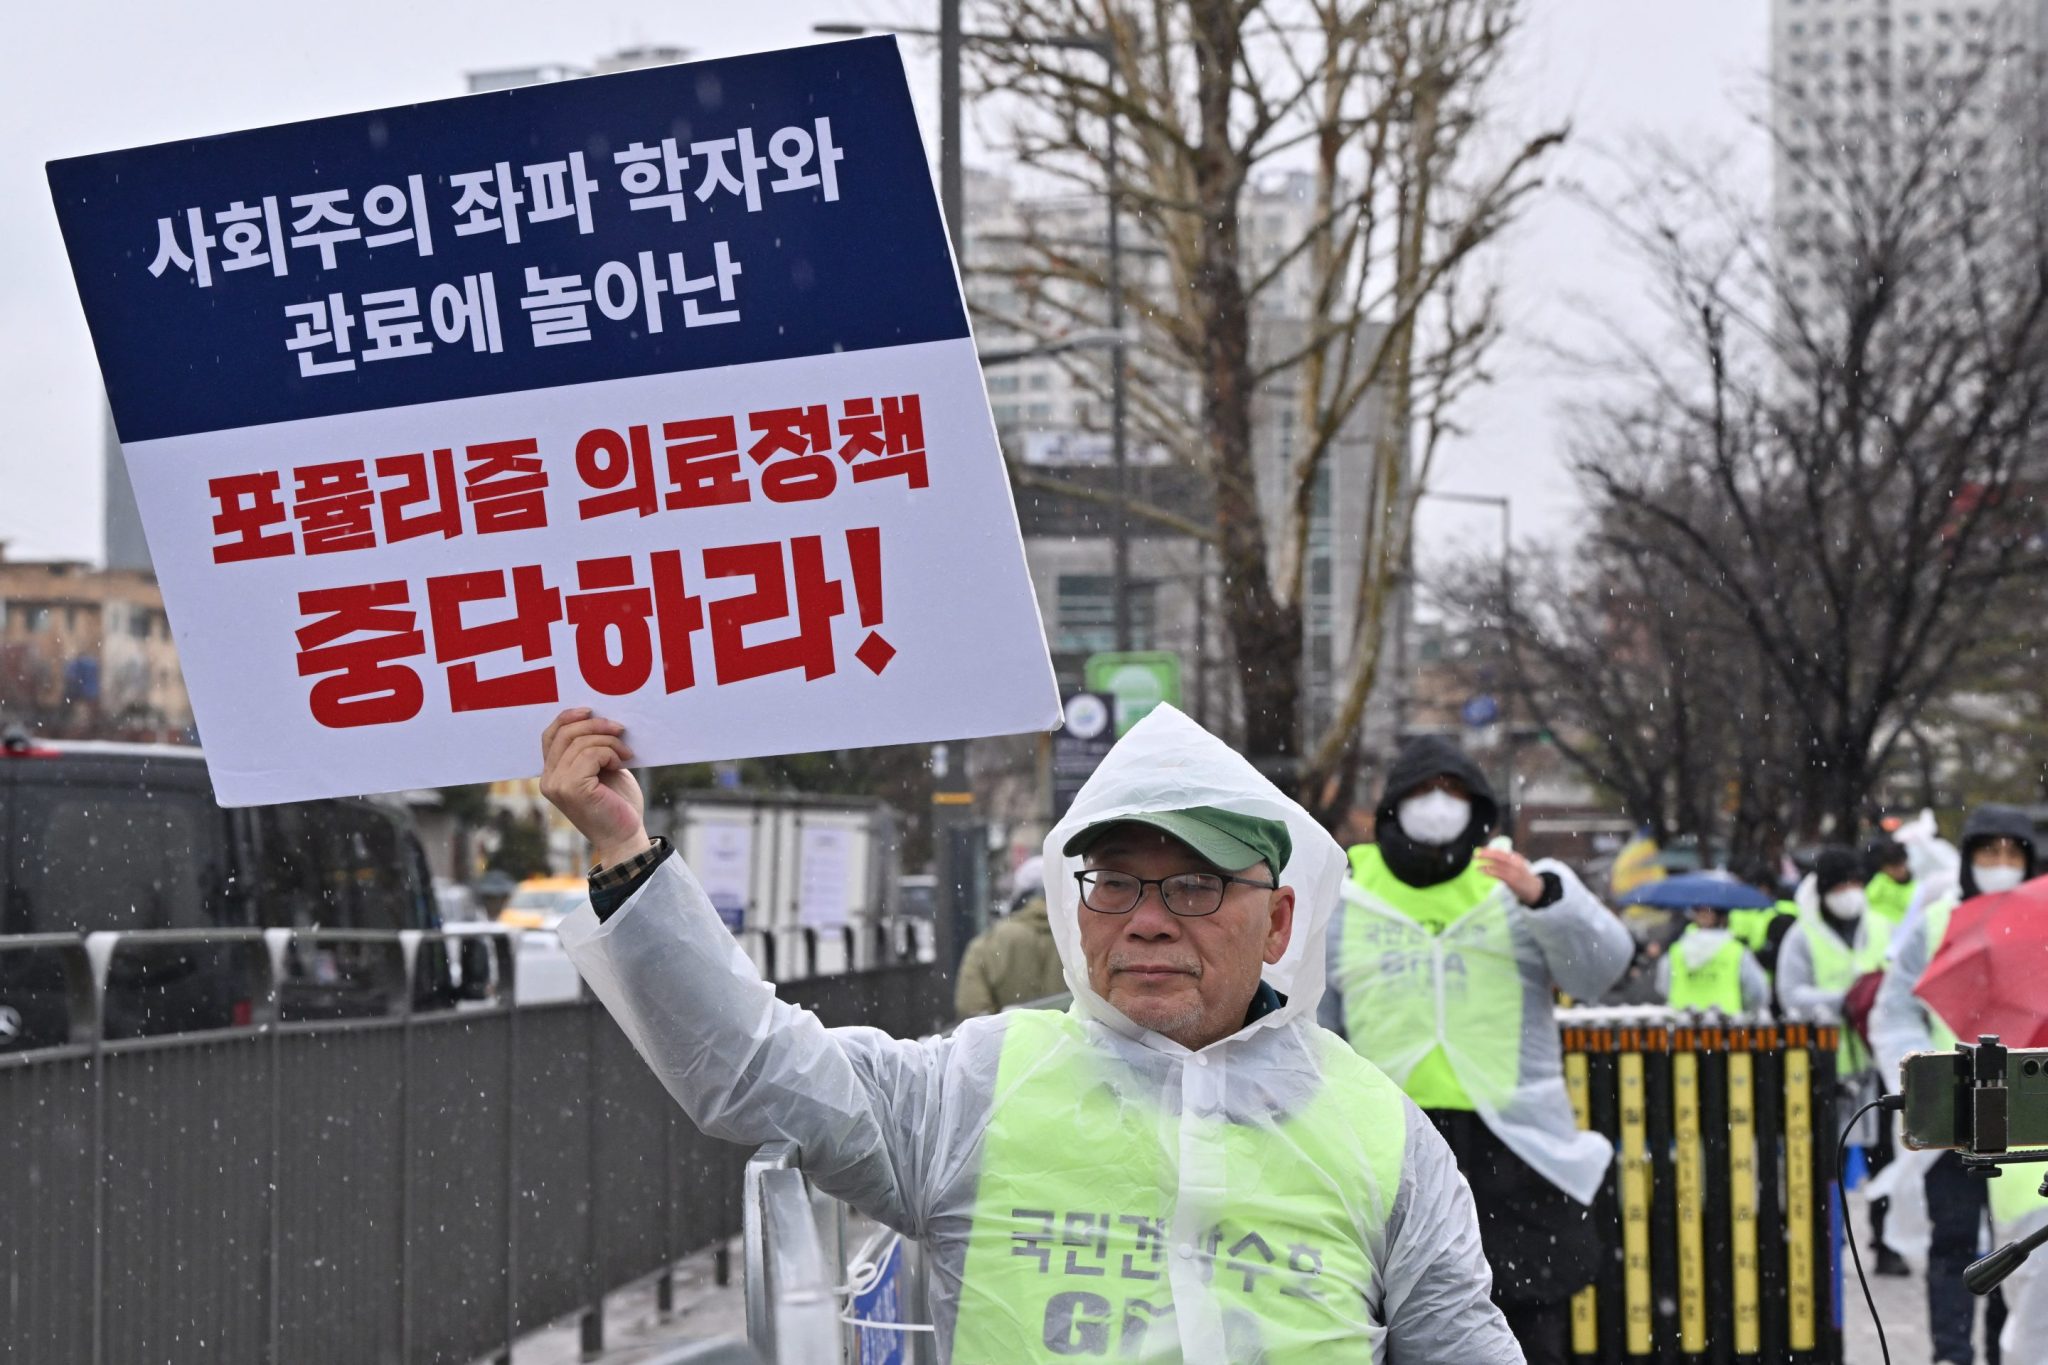 Korean doctors refuse to work to protest expanded access to medical school